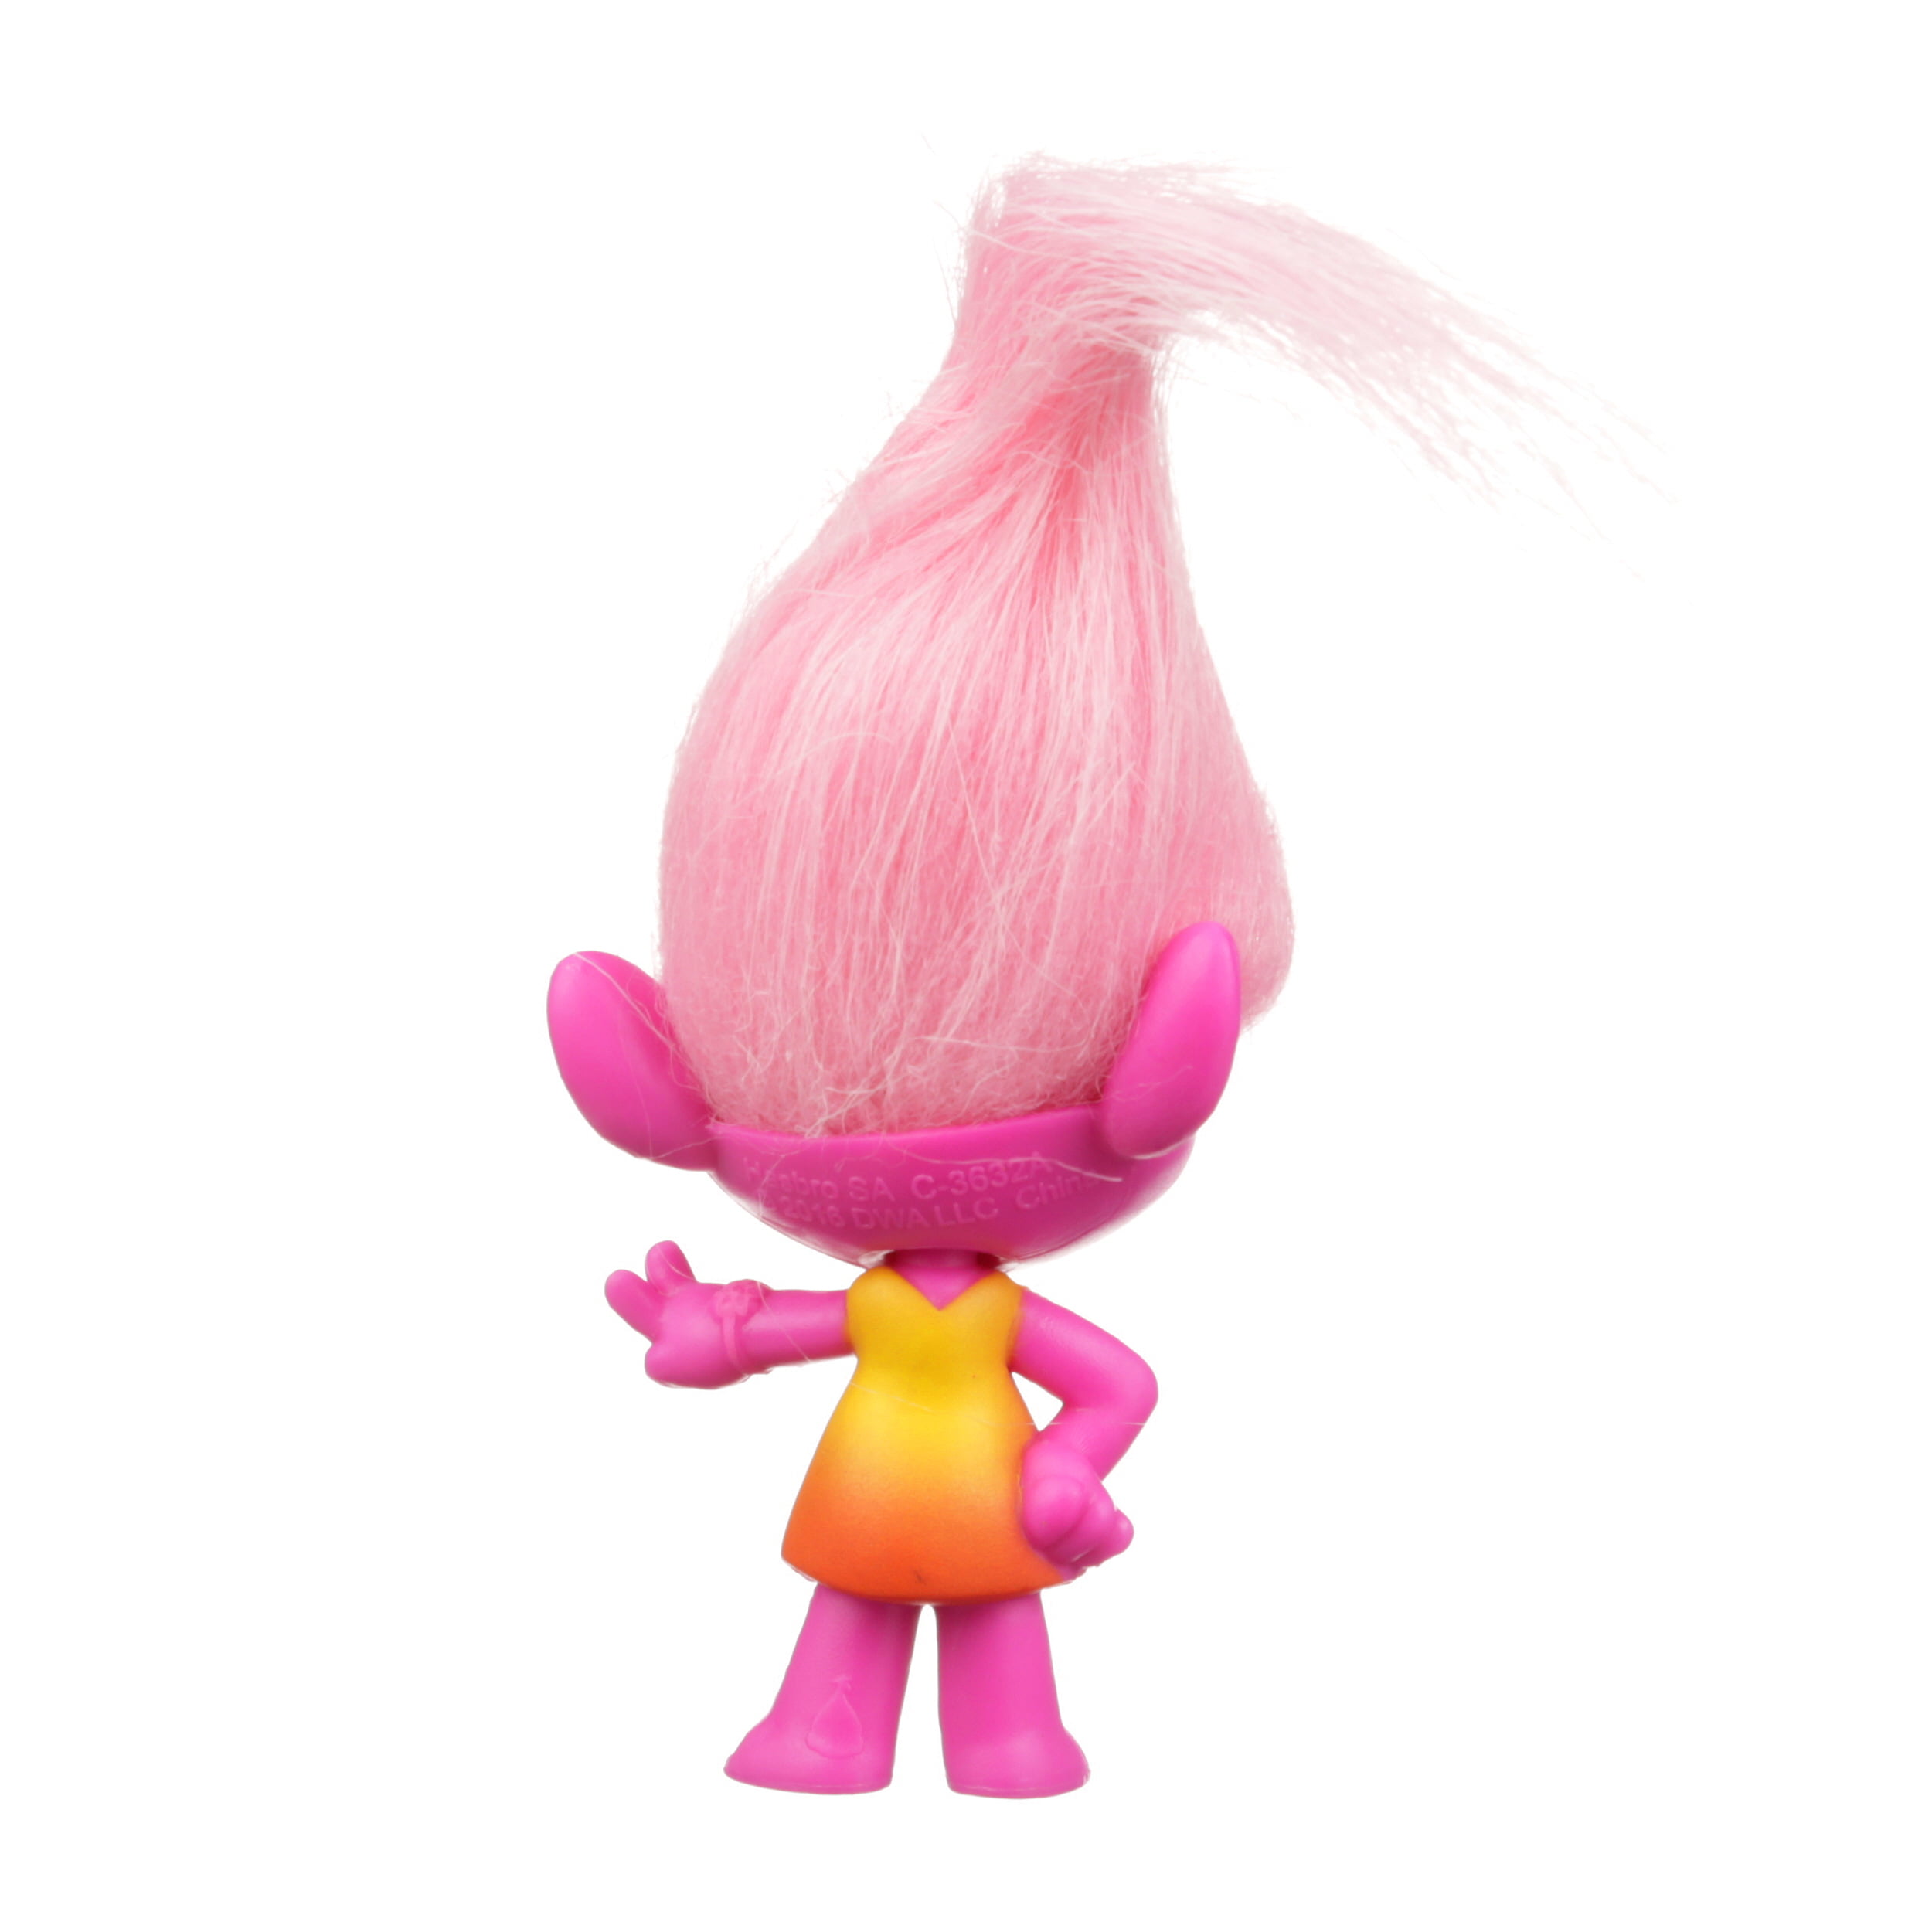 DreamWorks Trolls Moxie Collectible Figure with Printed Hair